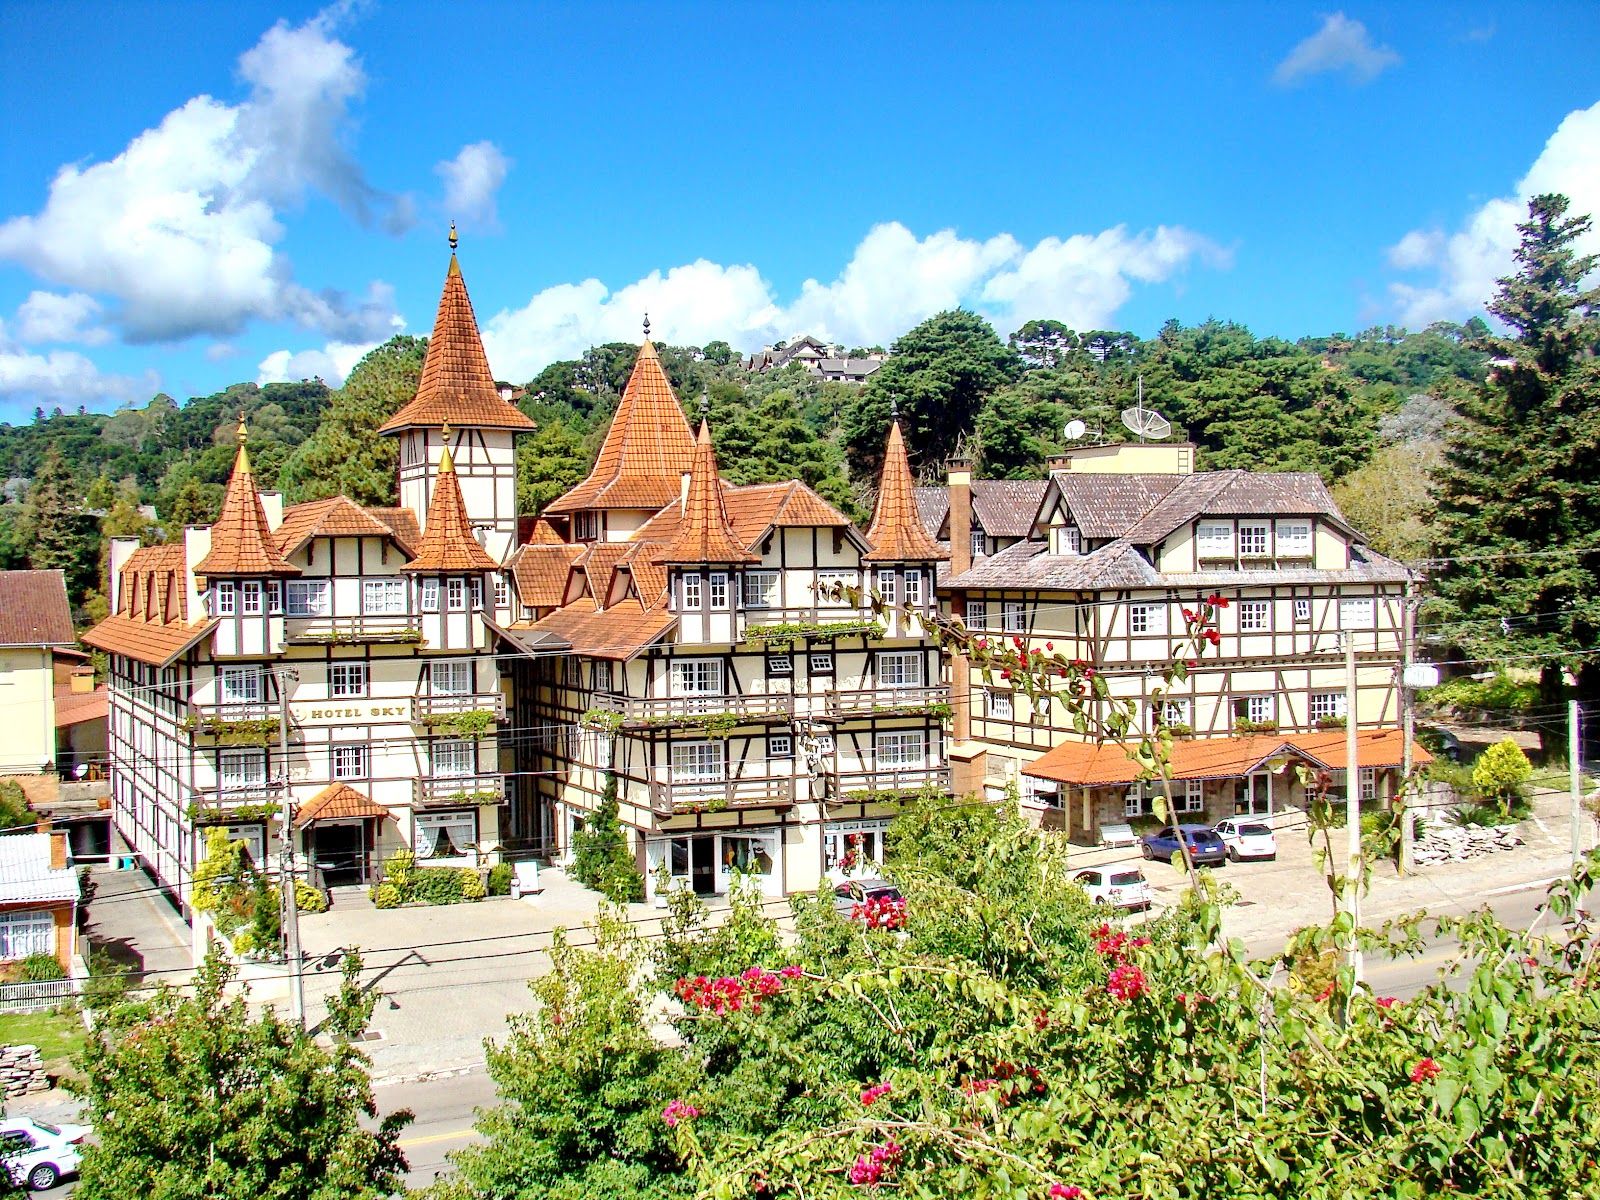 German-style hotel in Gramado. (Photo Internet reproduction)